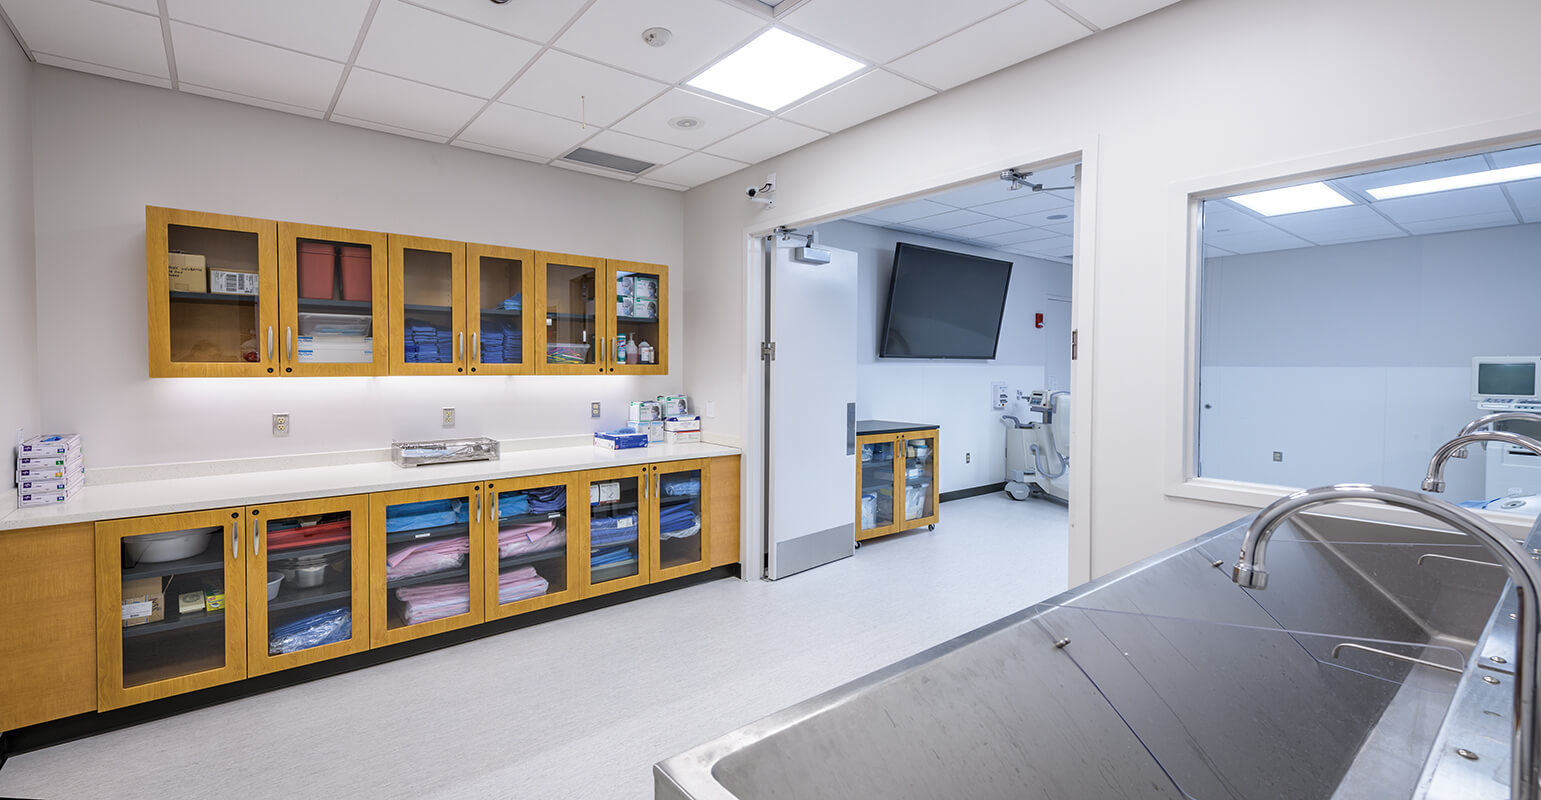 By leveraging modular configurations, healthcare facilities can significantly improve their operational workflow.